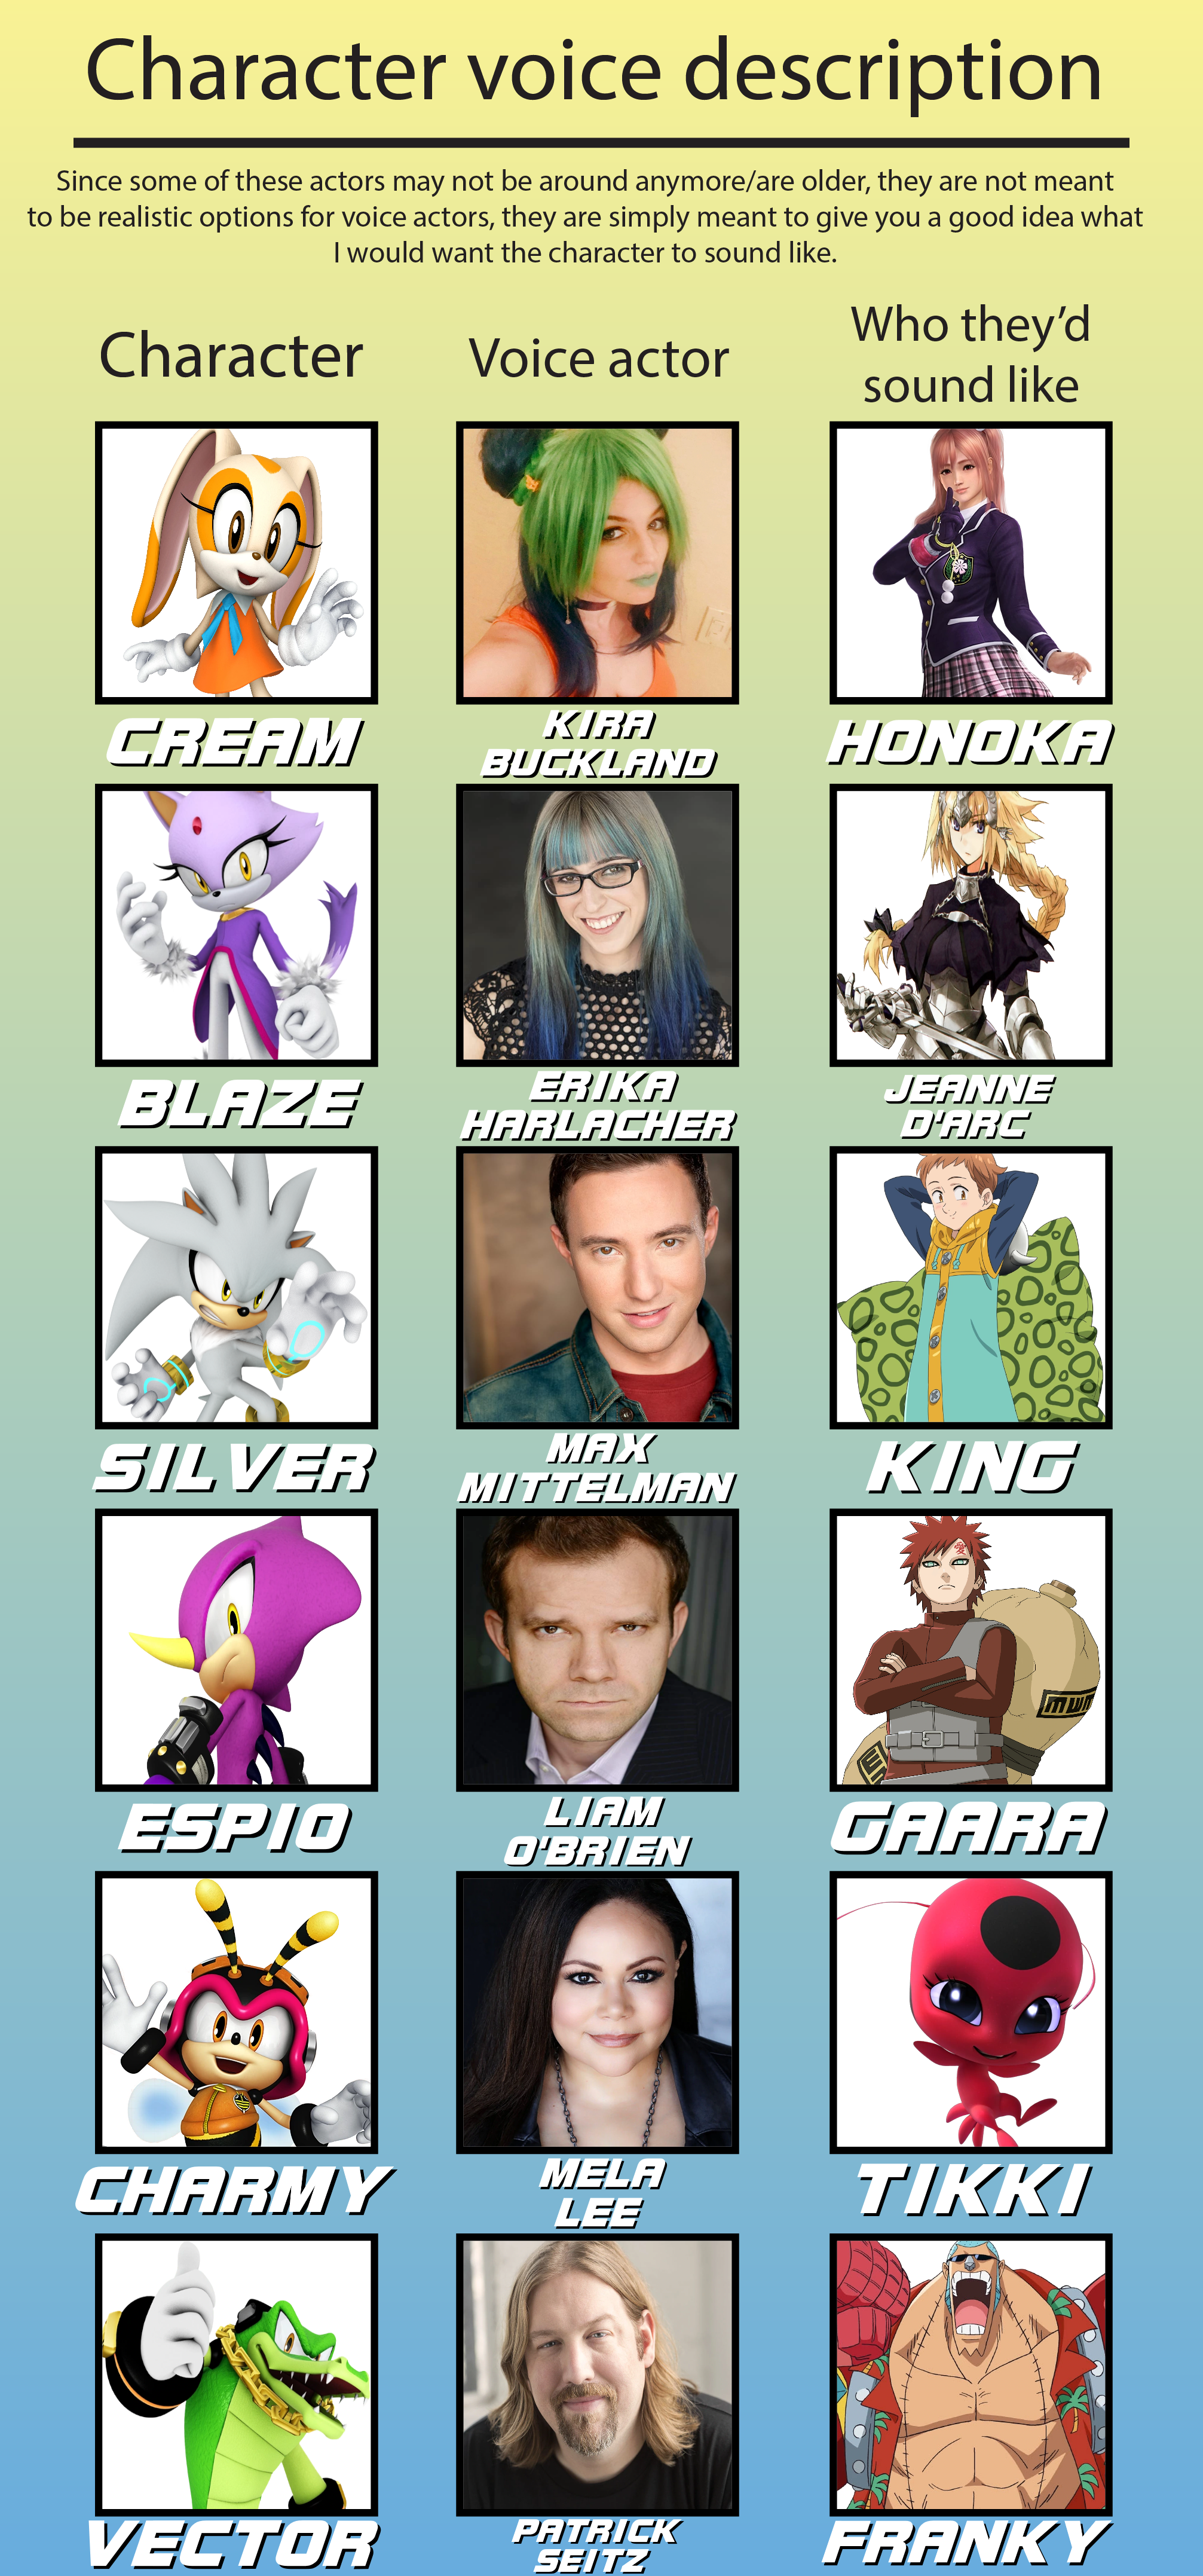 Sonic 2 Cast & Character Guide: What The Voice Actors Look Like